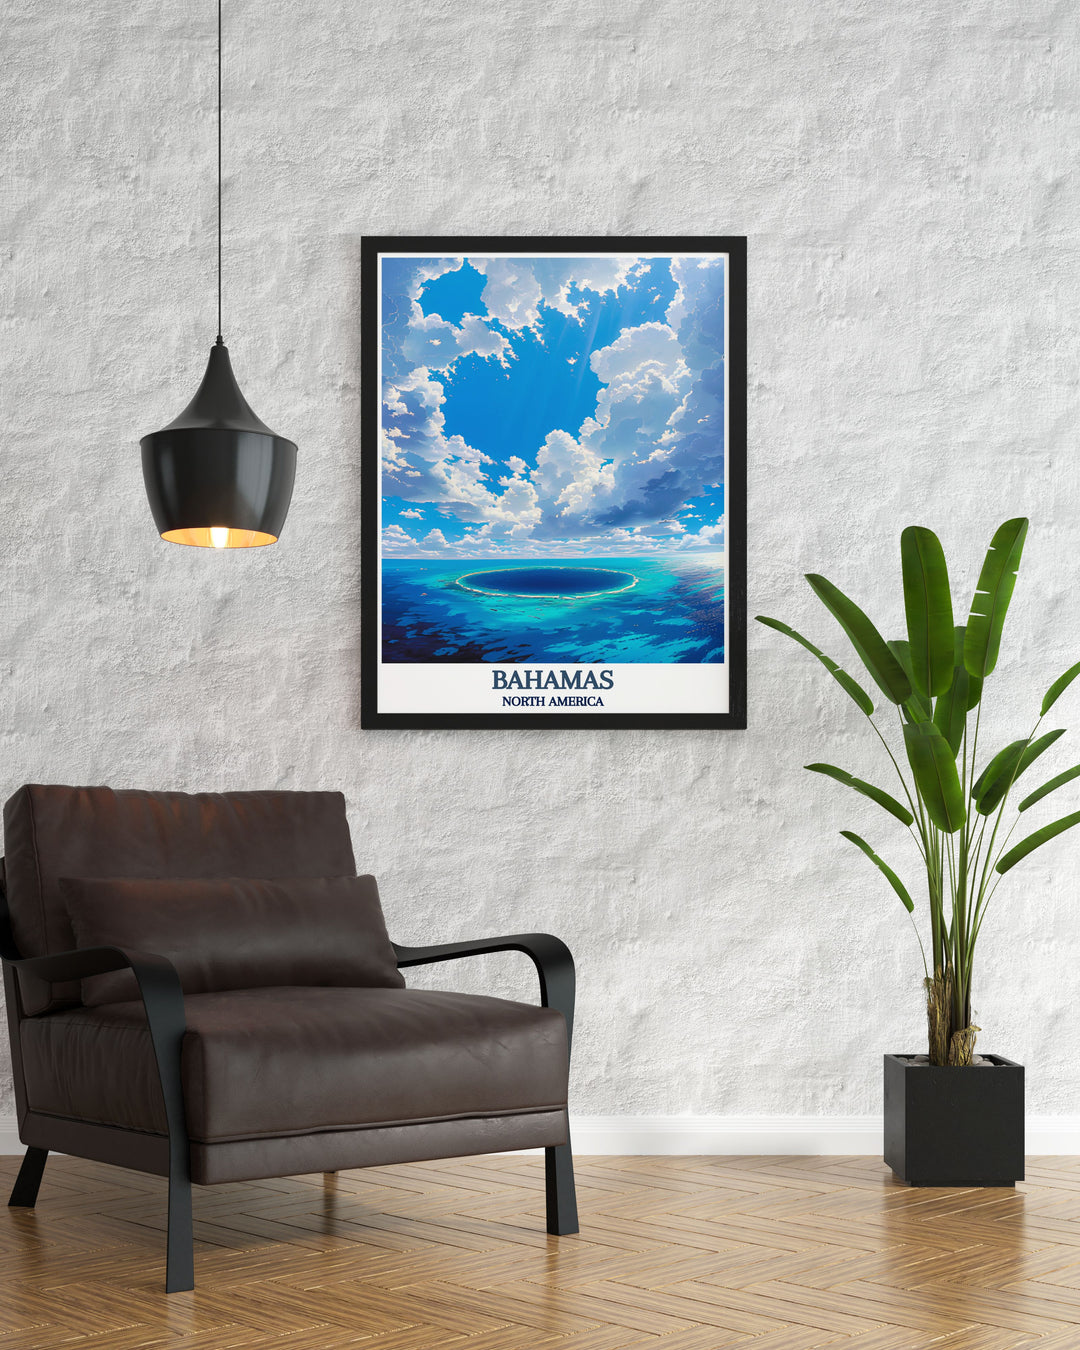 Wall art print featuring the crystal clear waters of the Blue Hole, highlighting the vibrant underwater life and coral formations of the Bahamas.